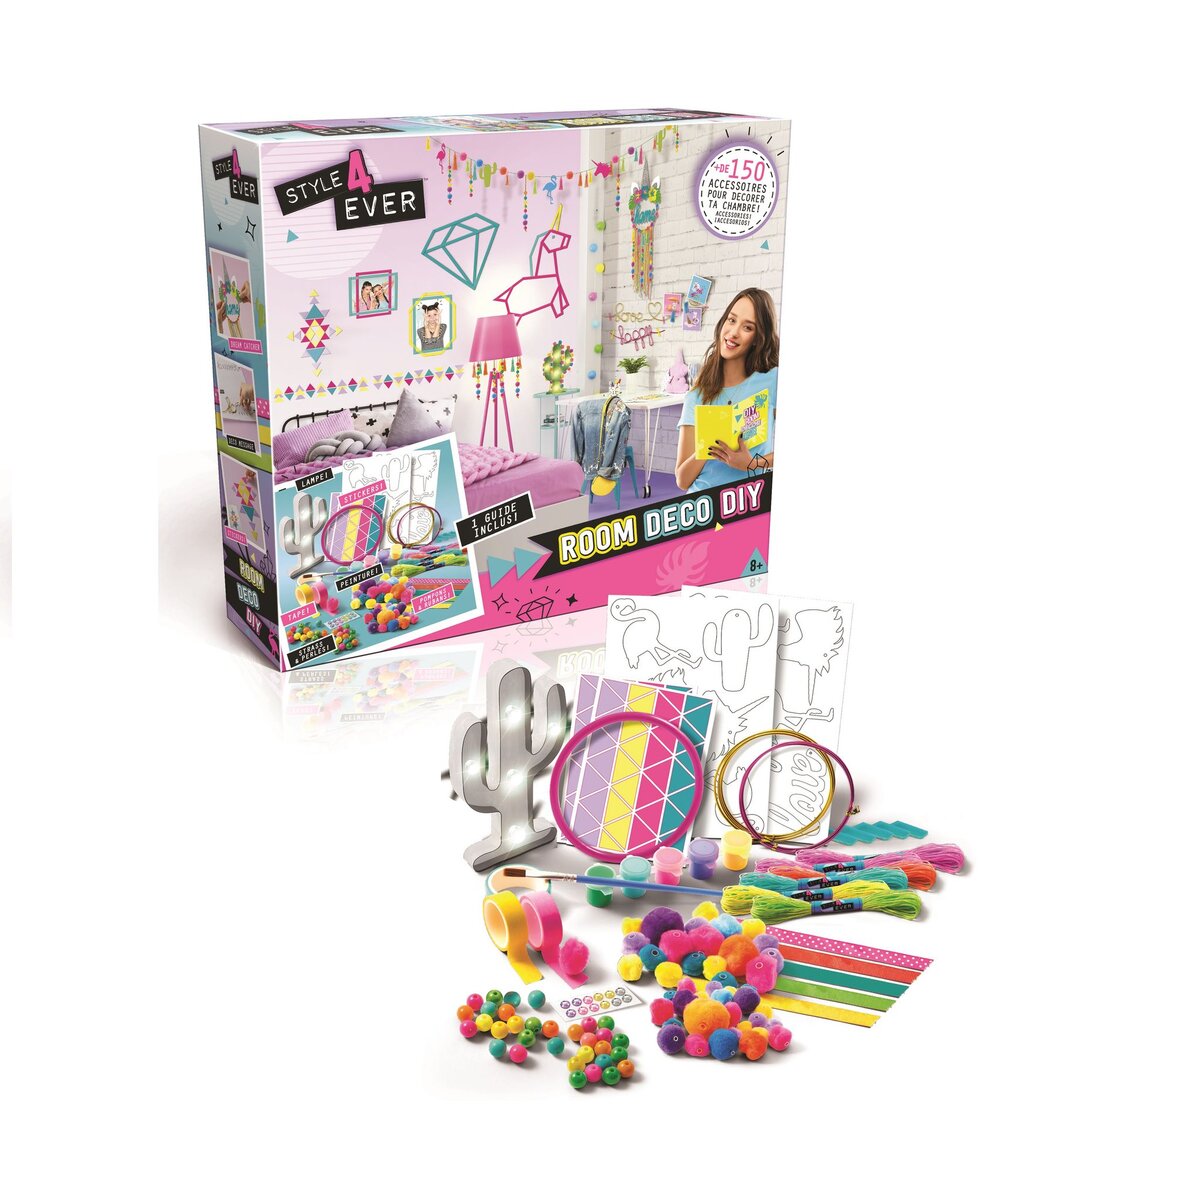 CANAL TOYS Style 4 ever - Coffret Room Deco DIY pas cher 